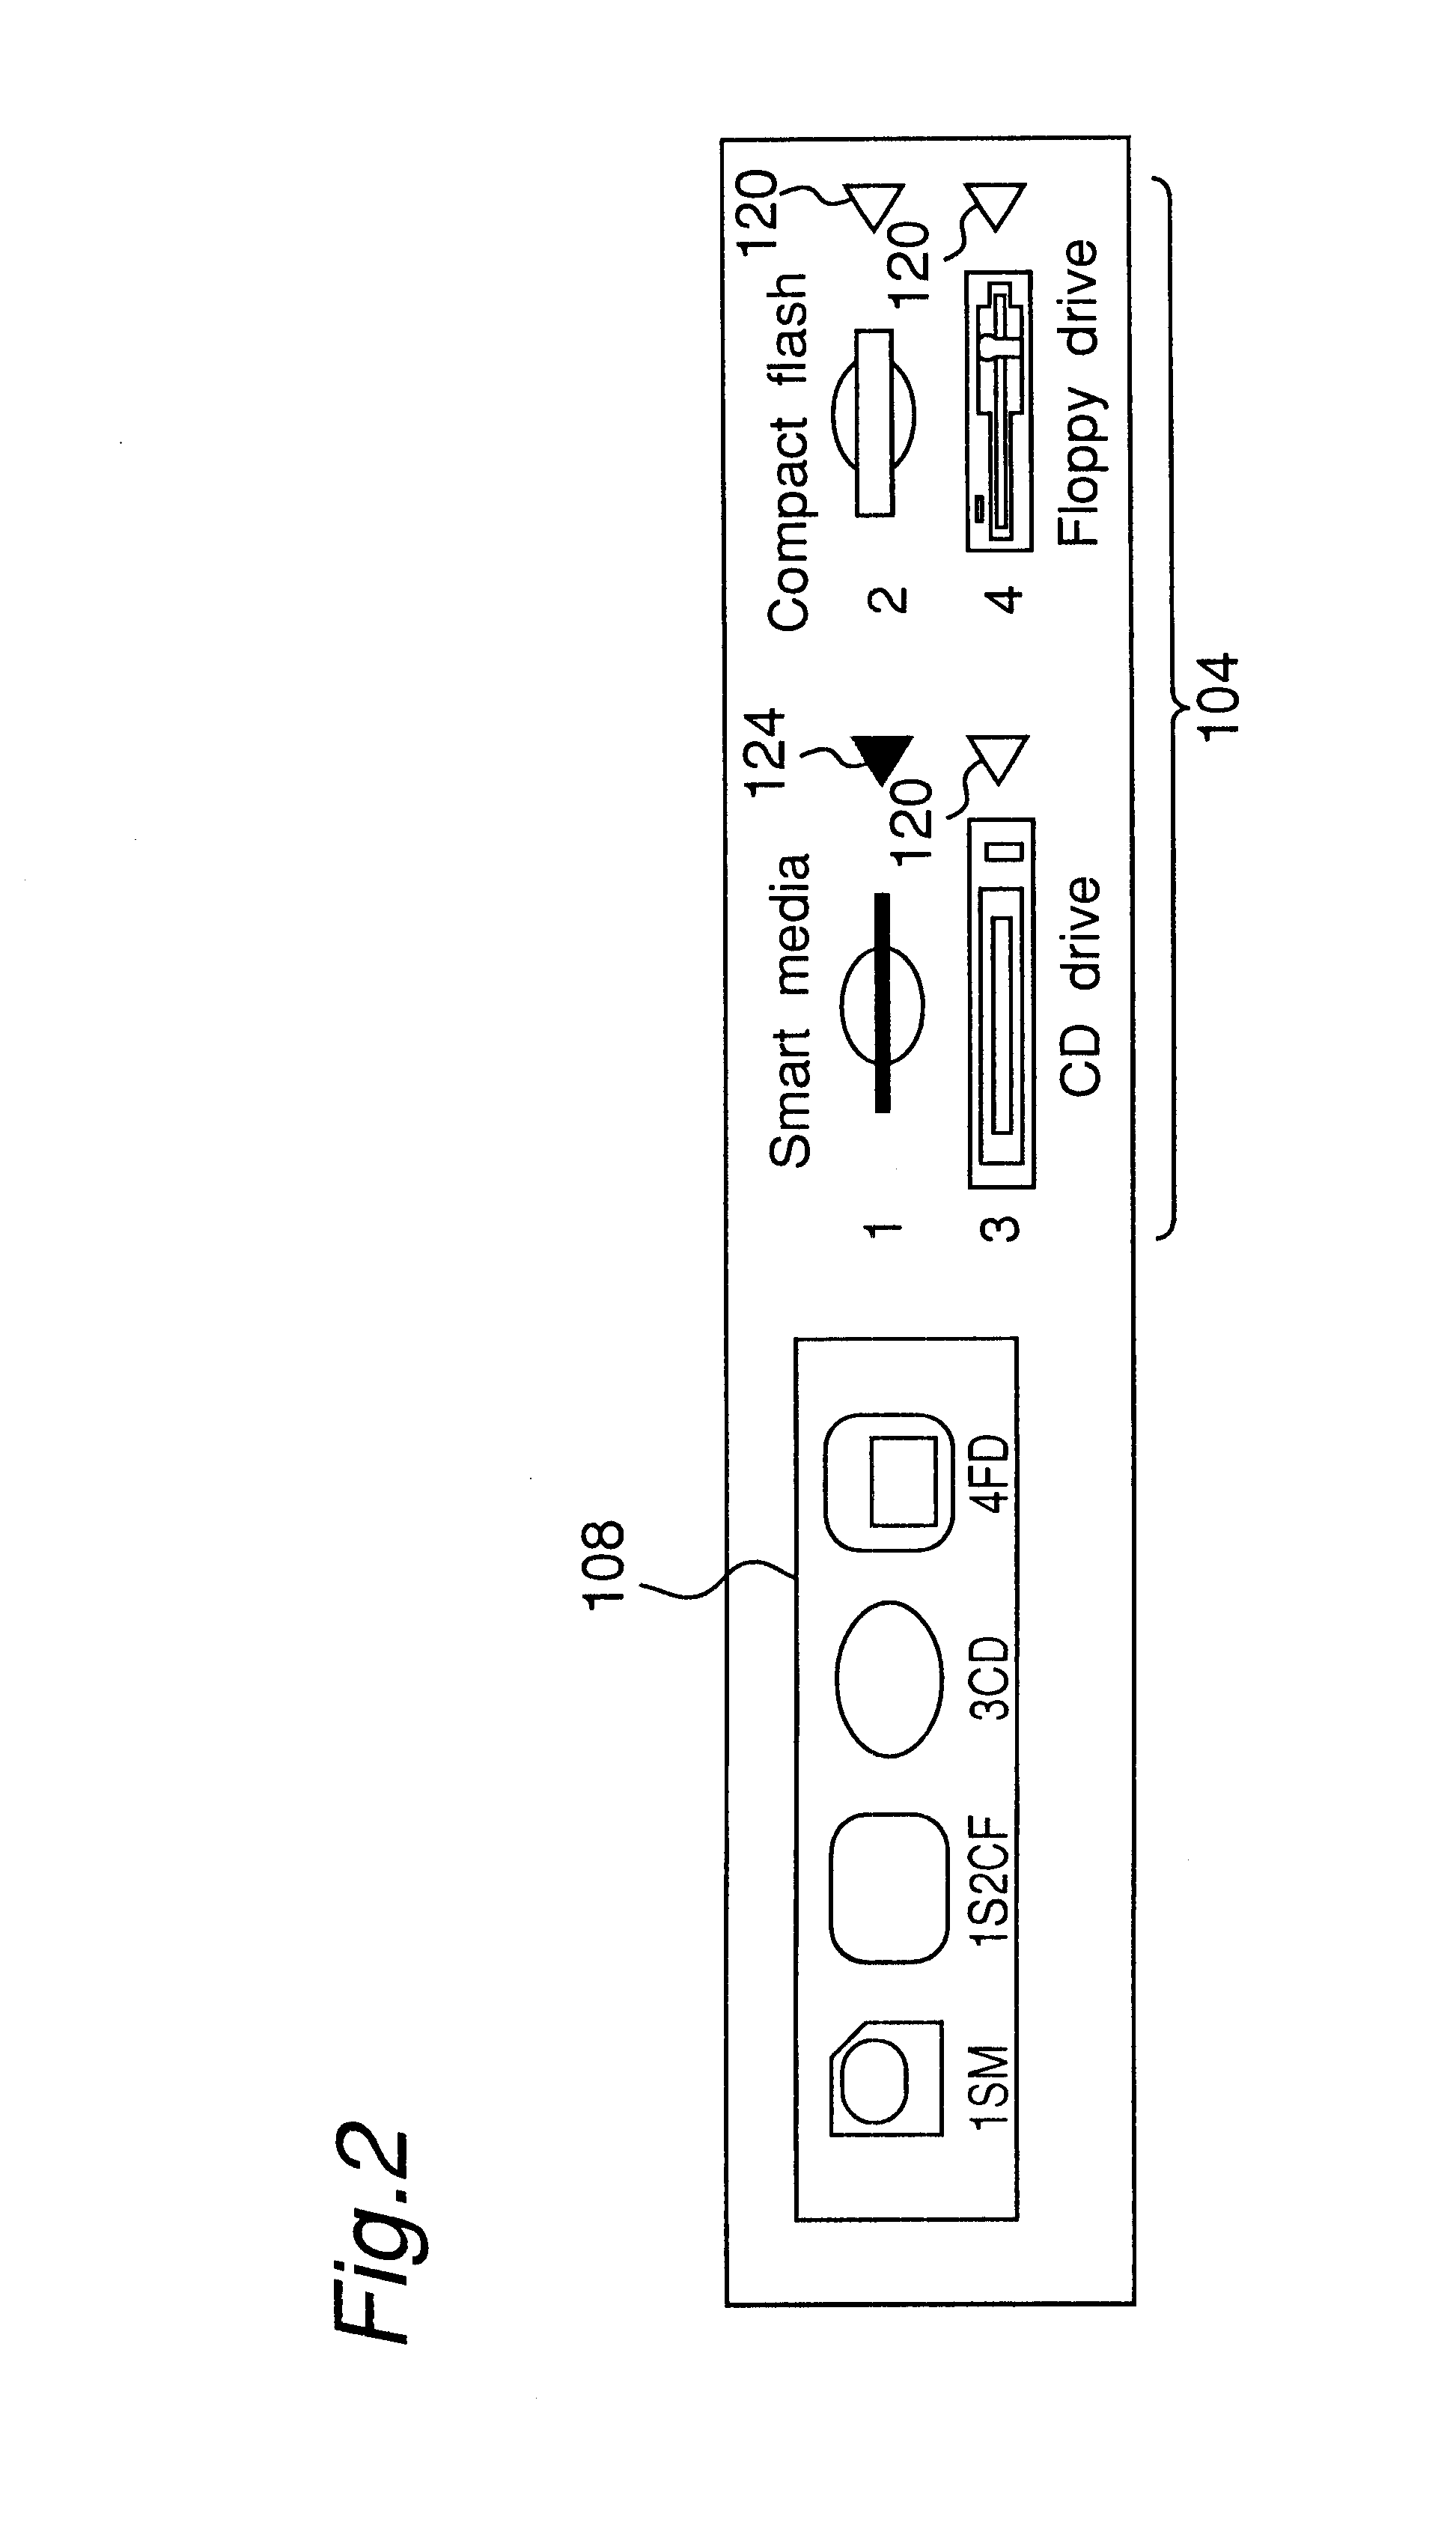 Print system and a sheet-processing device suitable for such a print system